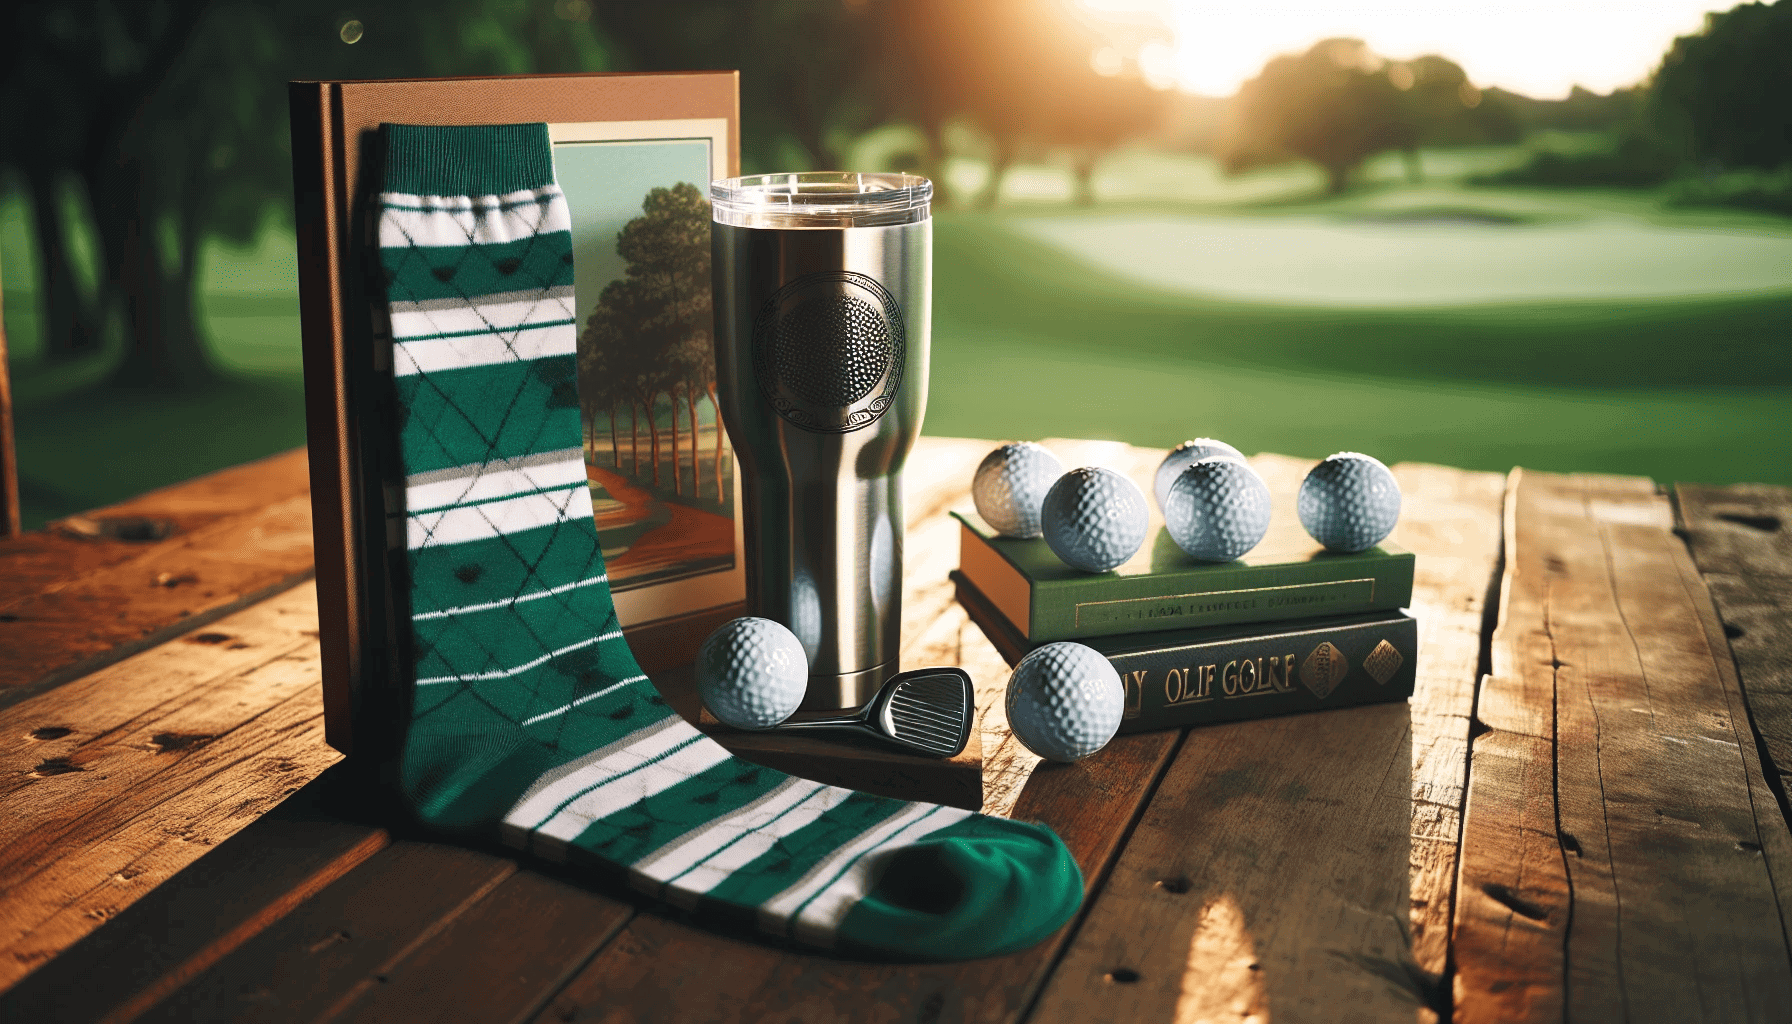 Leisurely golf-themed gift options such as golf-themed socks and tumblers